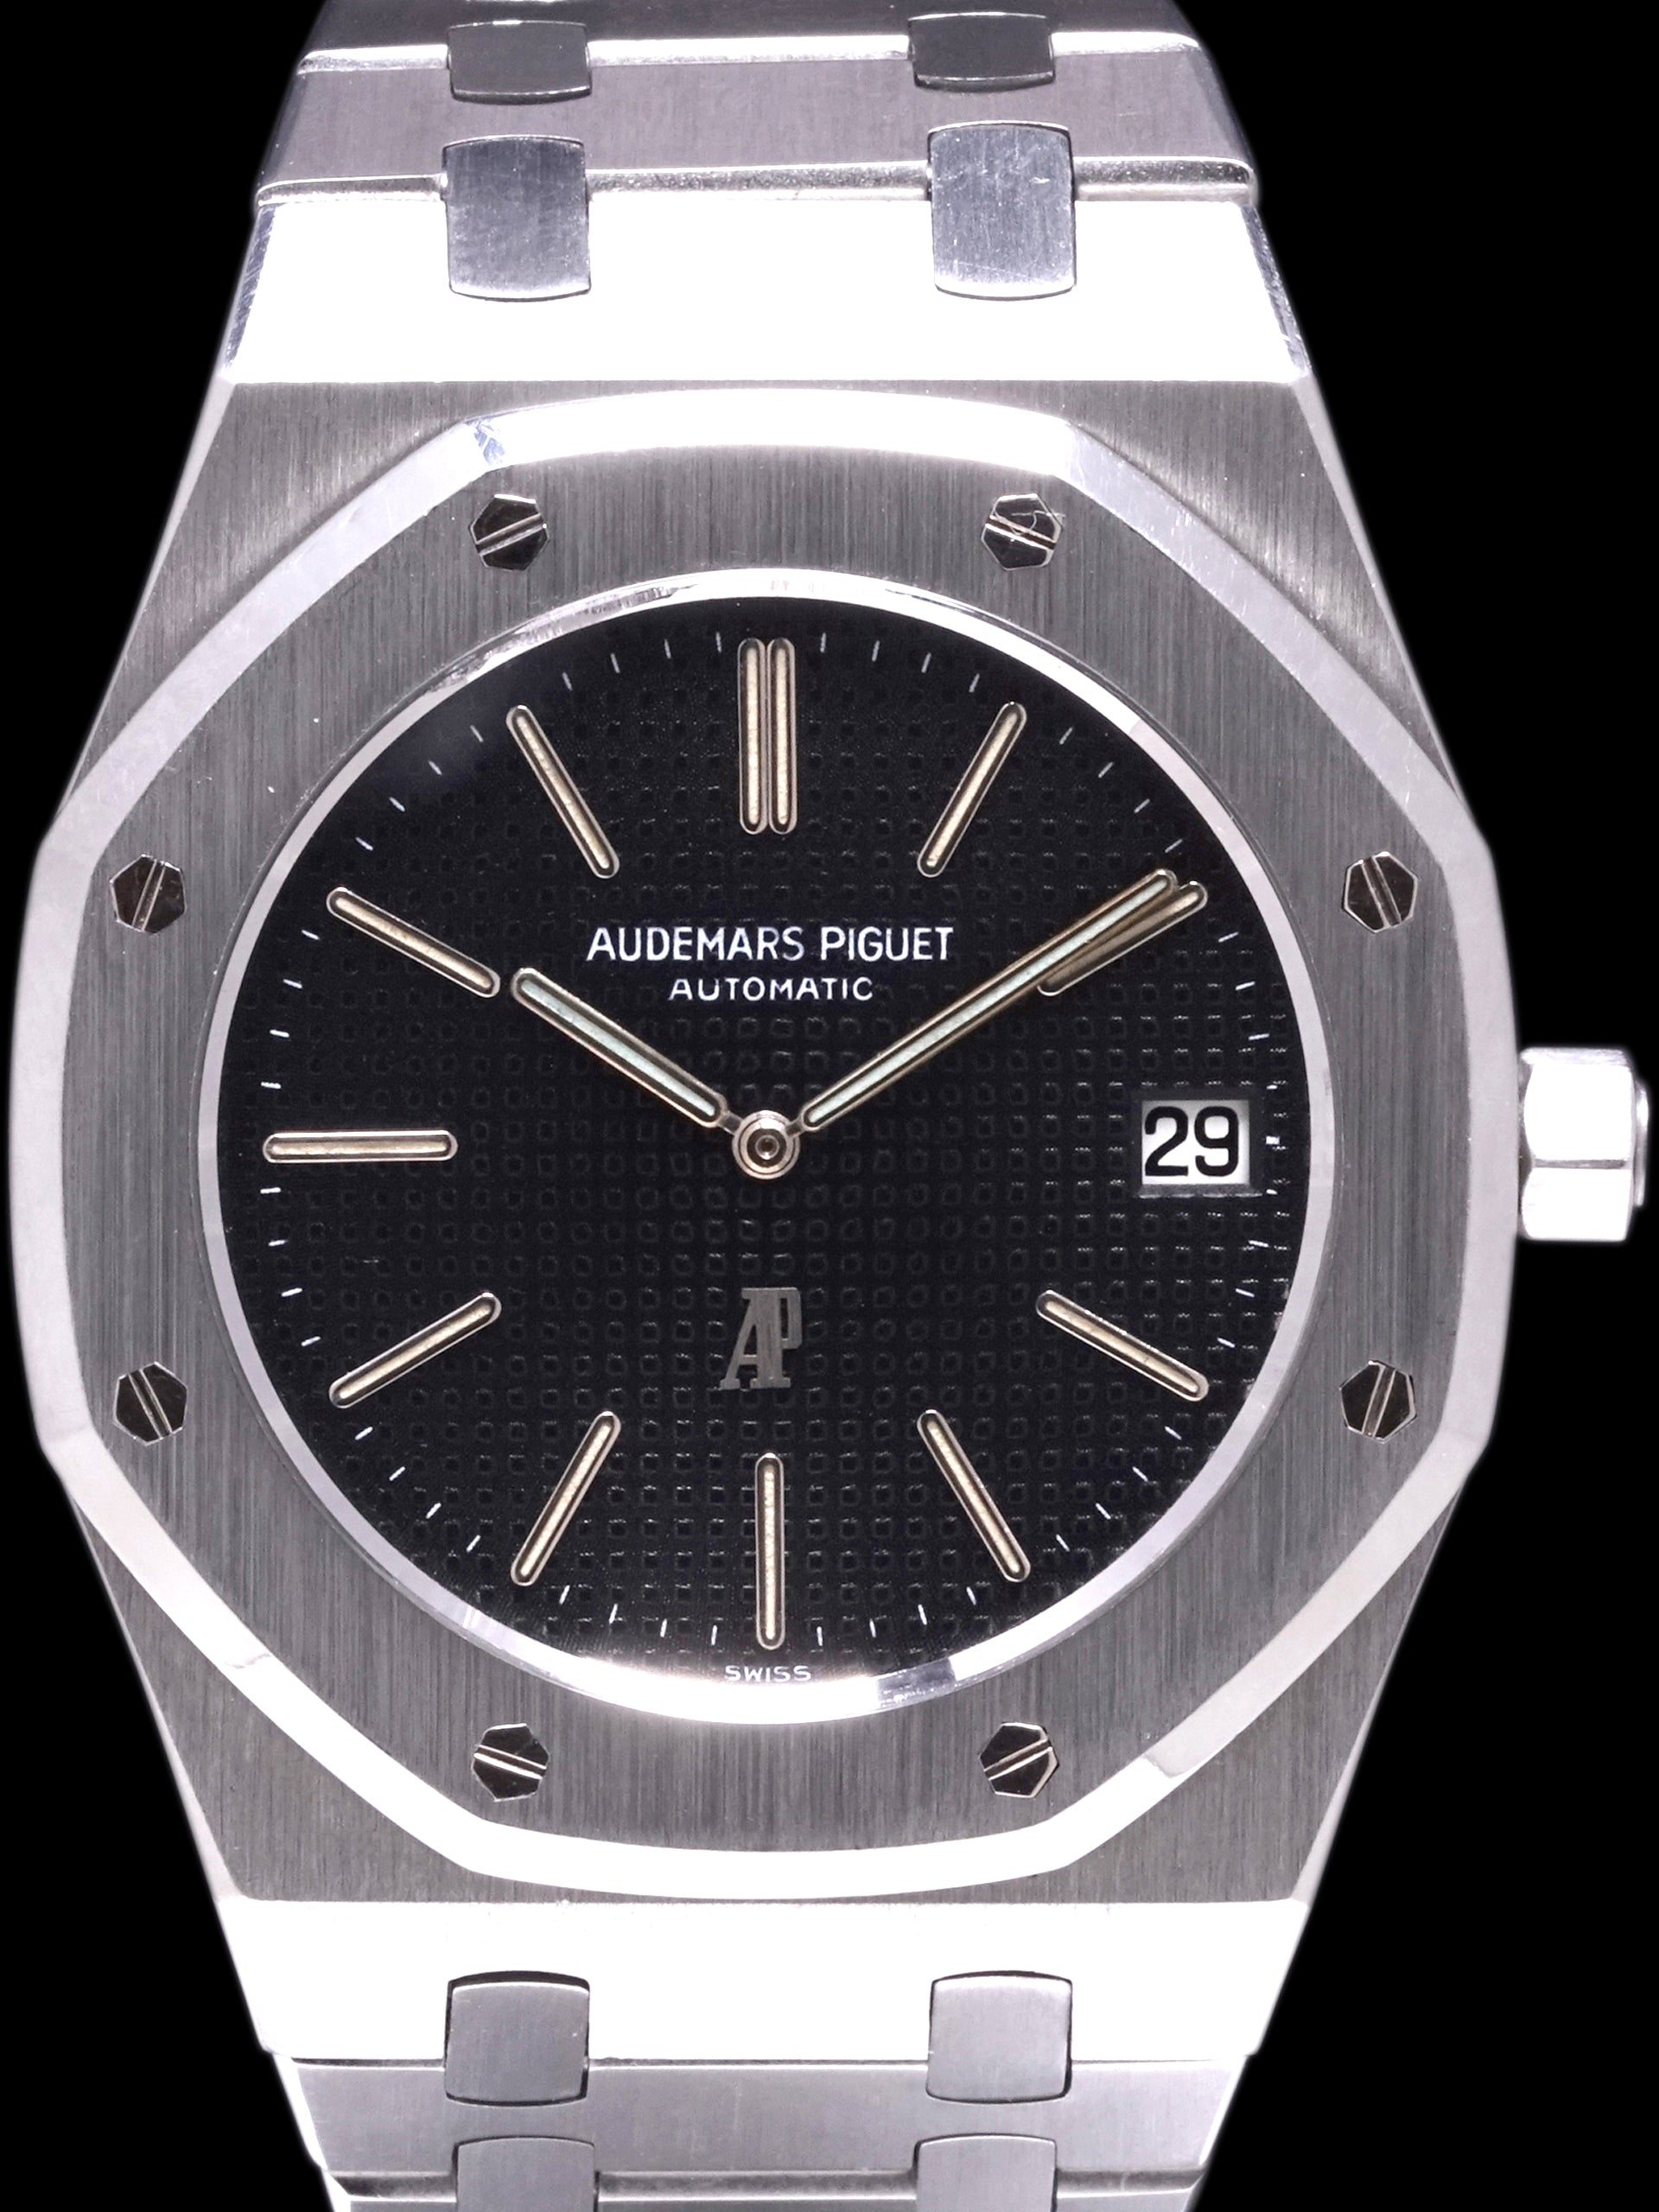 *Unpolished* 1976 Audemars Piguet Royal Oak (Ref. 5402) "B Series" W/ Extract From The Archives